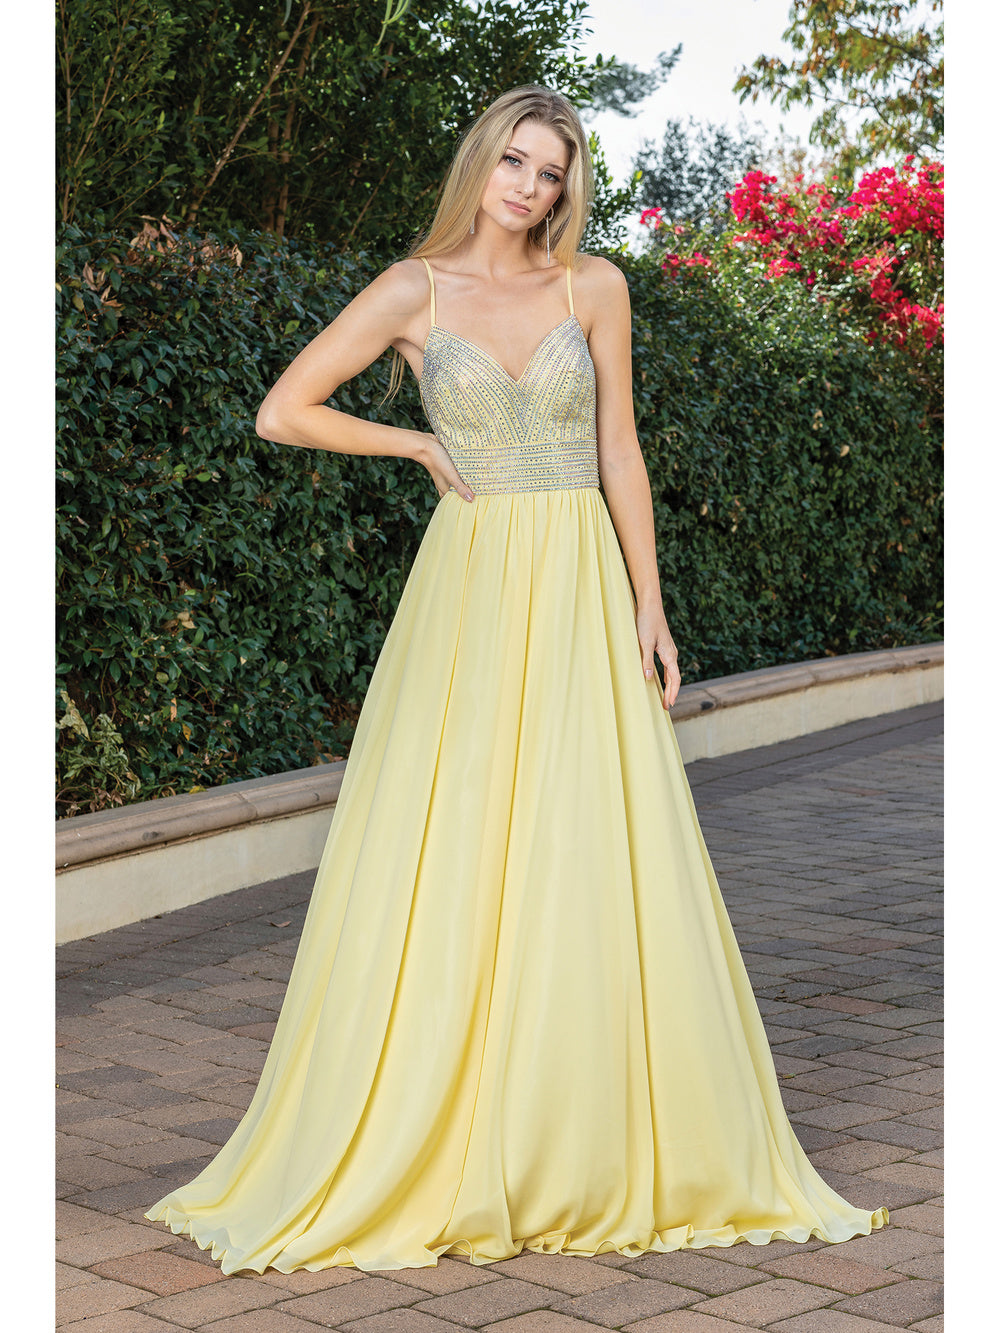 DQ 4277 - Flowy Chiffon A-Line Prom Gown with In-Line V-Neck Bodice & Open Lace Up Spaghetti Strap Corset PROM GOWN Dancing Queen XS YELLOW 